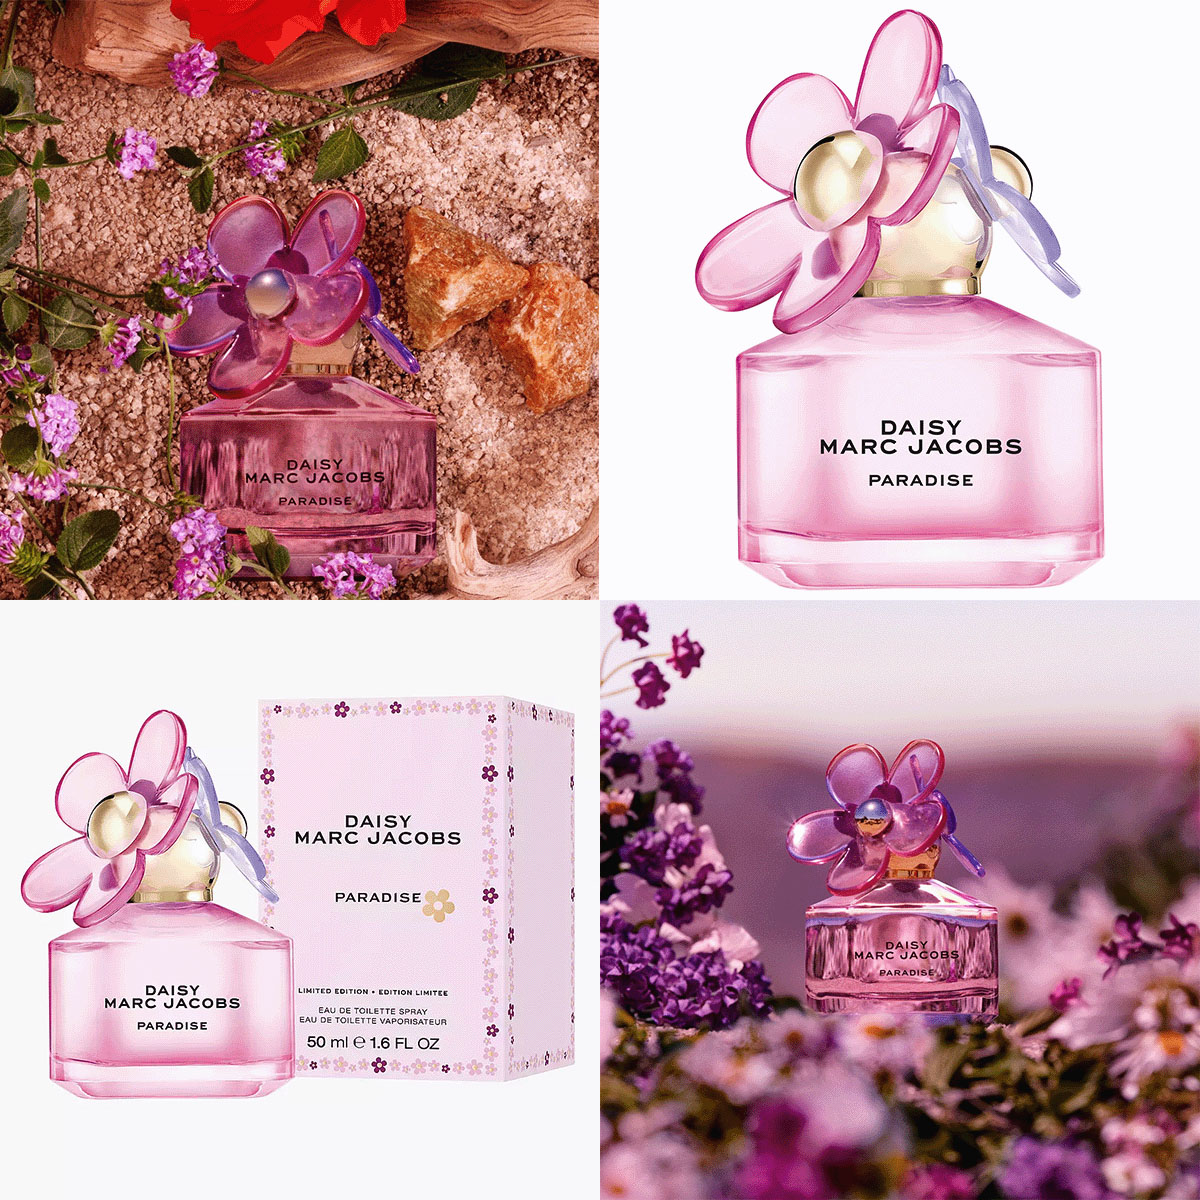 Marc Jacobs Daisy Paradise perfume bottle, packaging, and fragrance ads